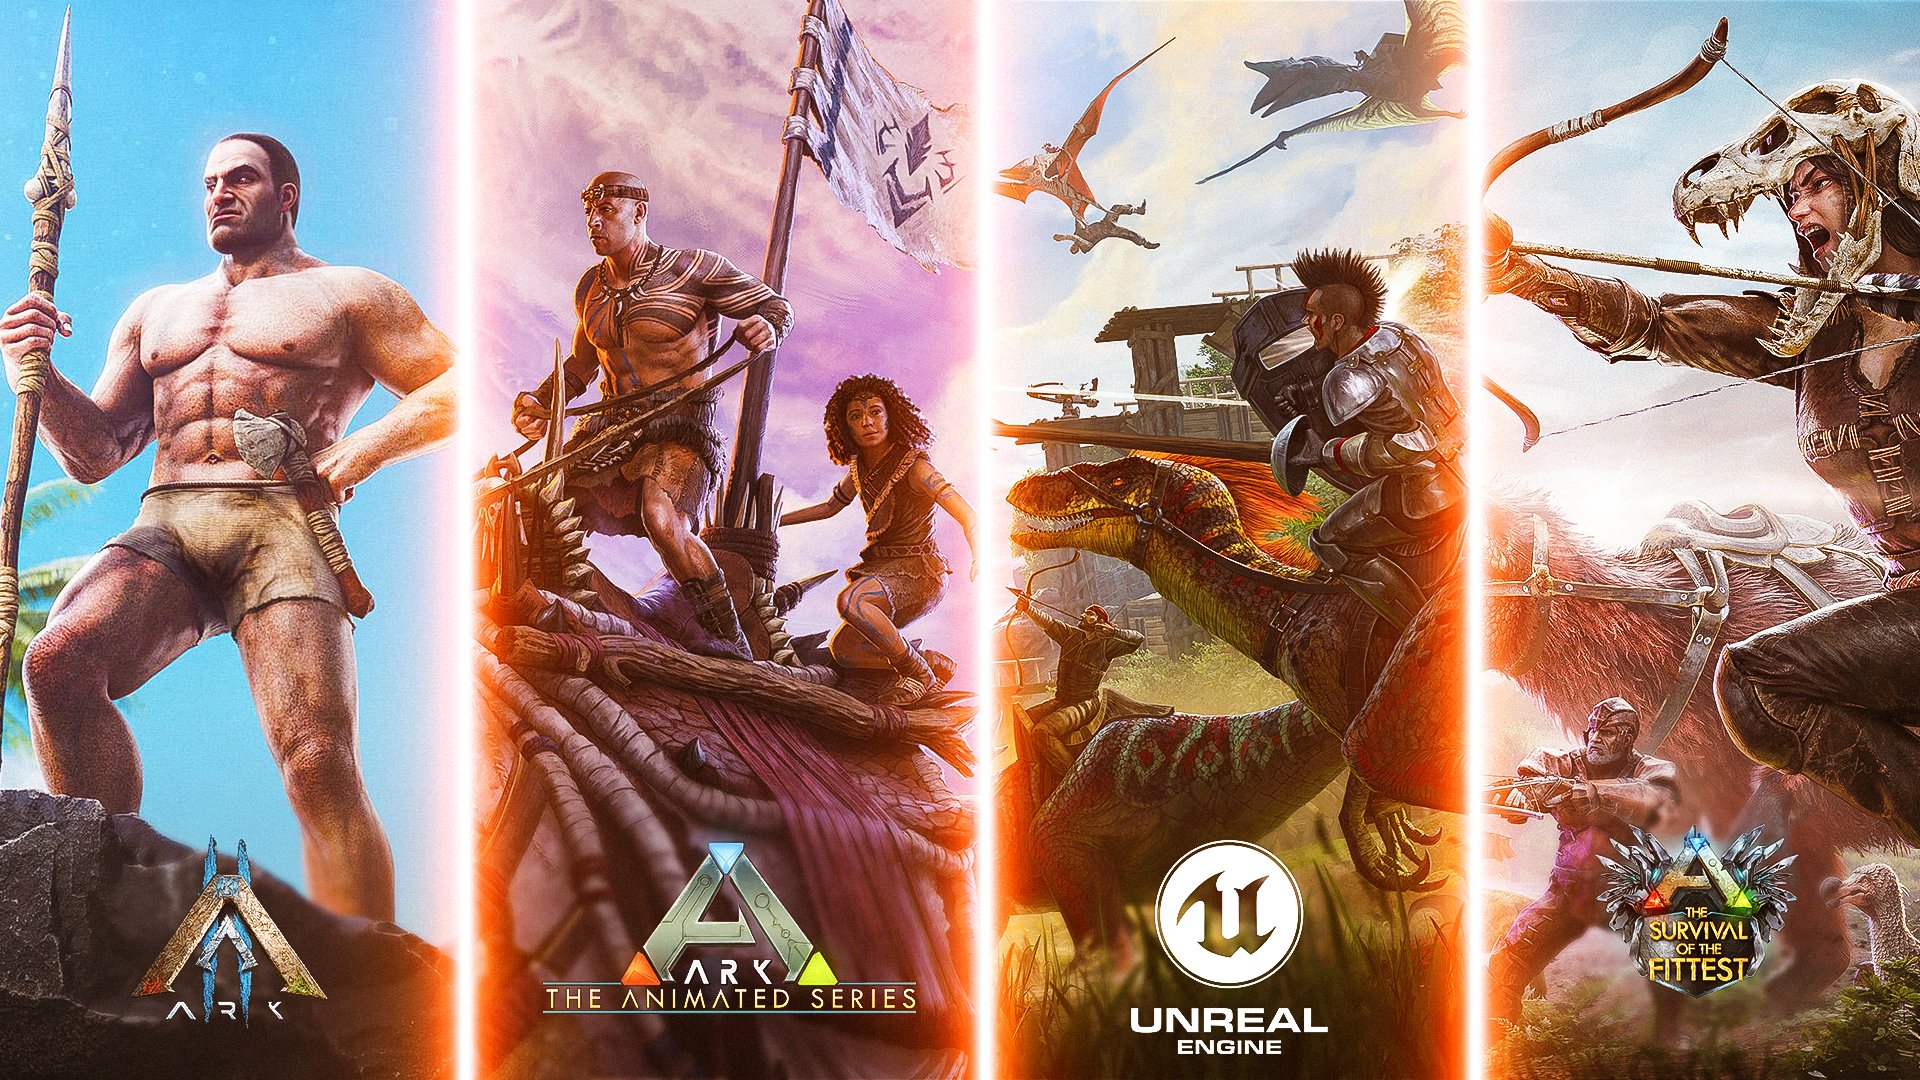 ARK Ascended News on X: 🚨 #ARK2 Mobile is now in the making! Studio  Wildcard has officially posted an announcement on LinkedIn that they are  recruiting developers for the mobile version of